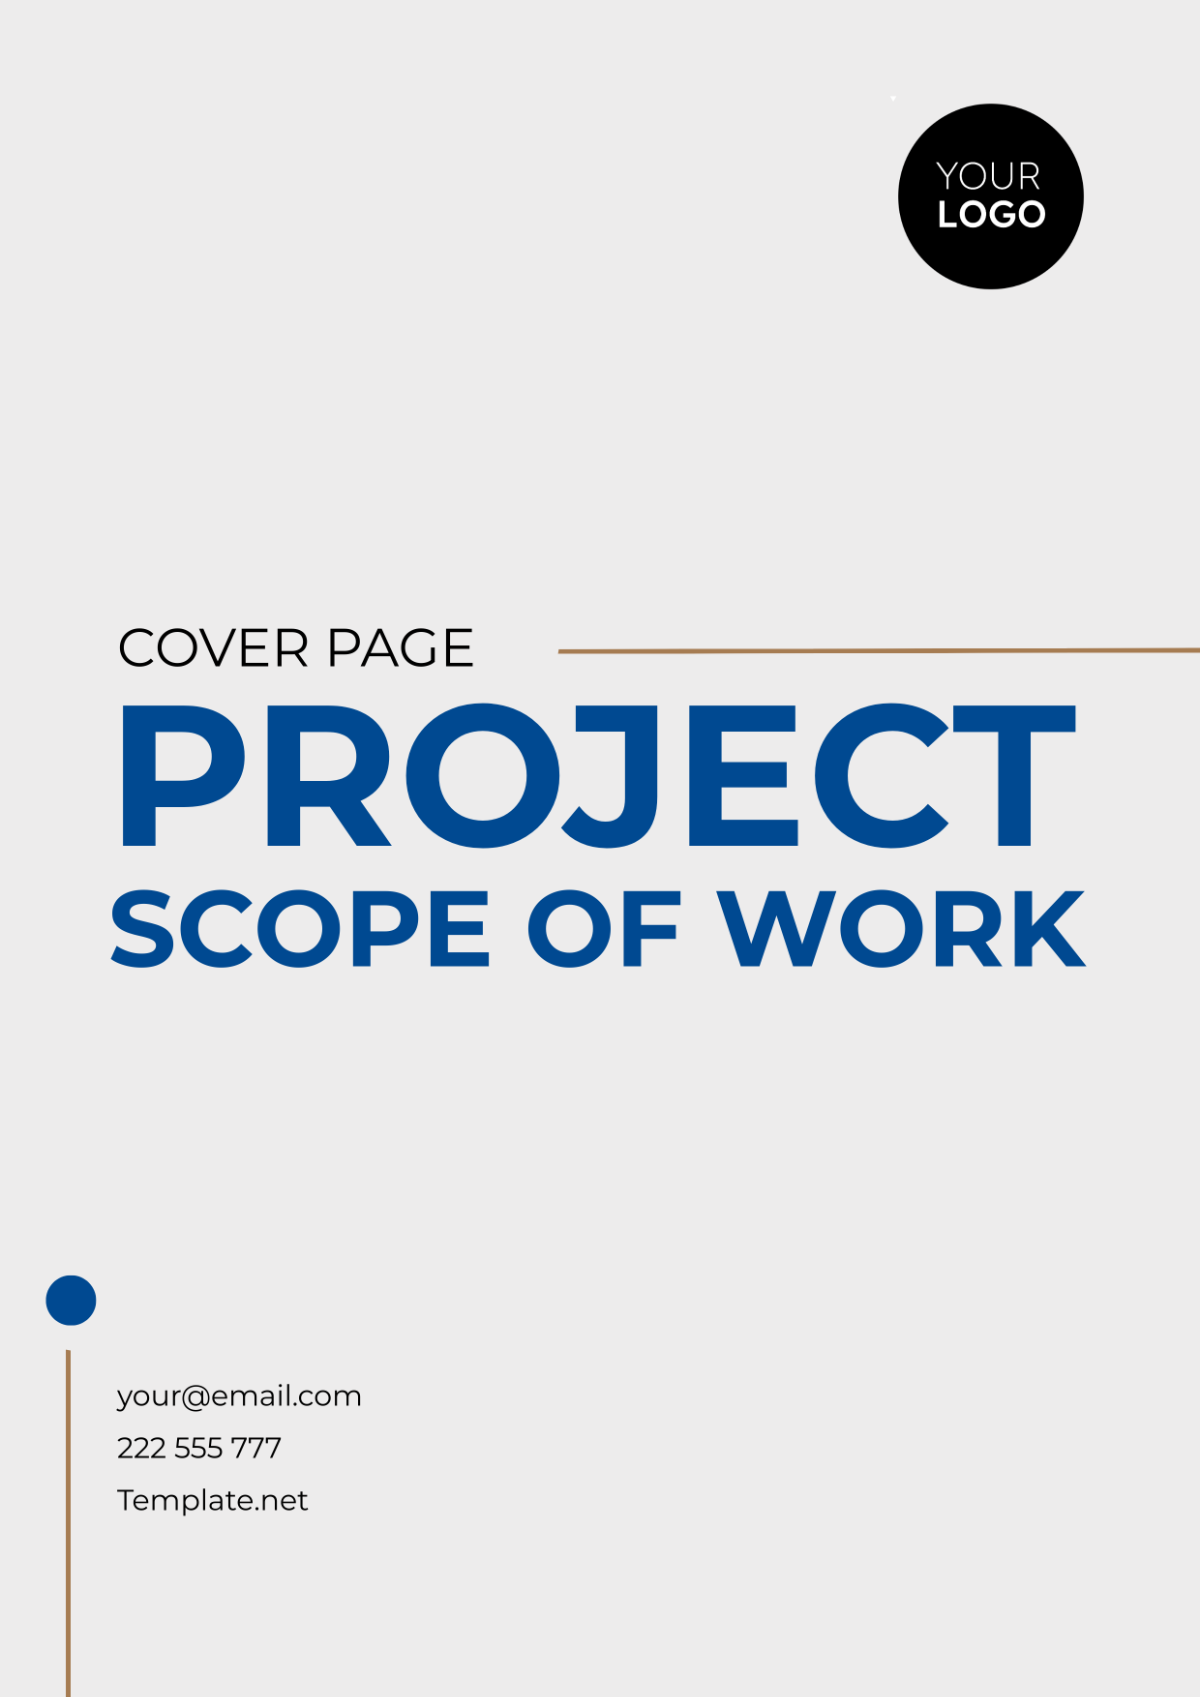 Project Scope of Work Cover Page Template